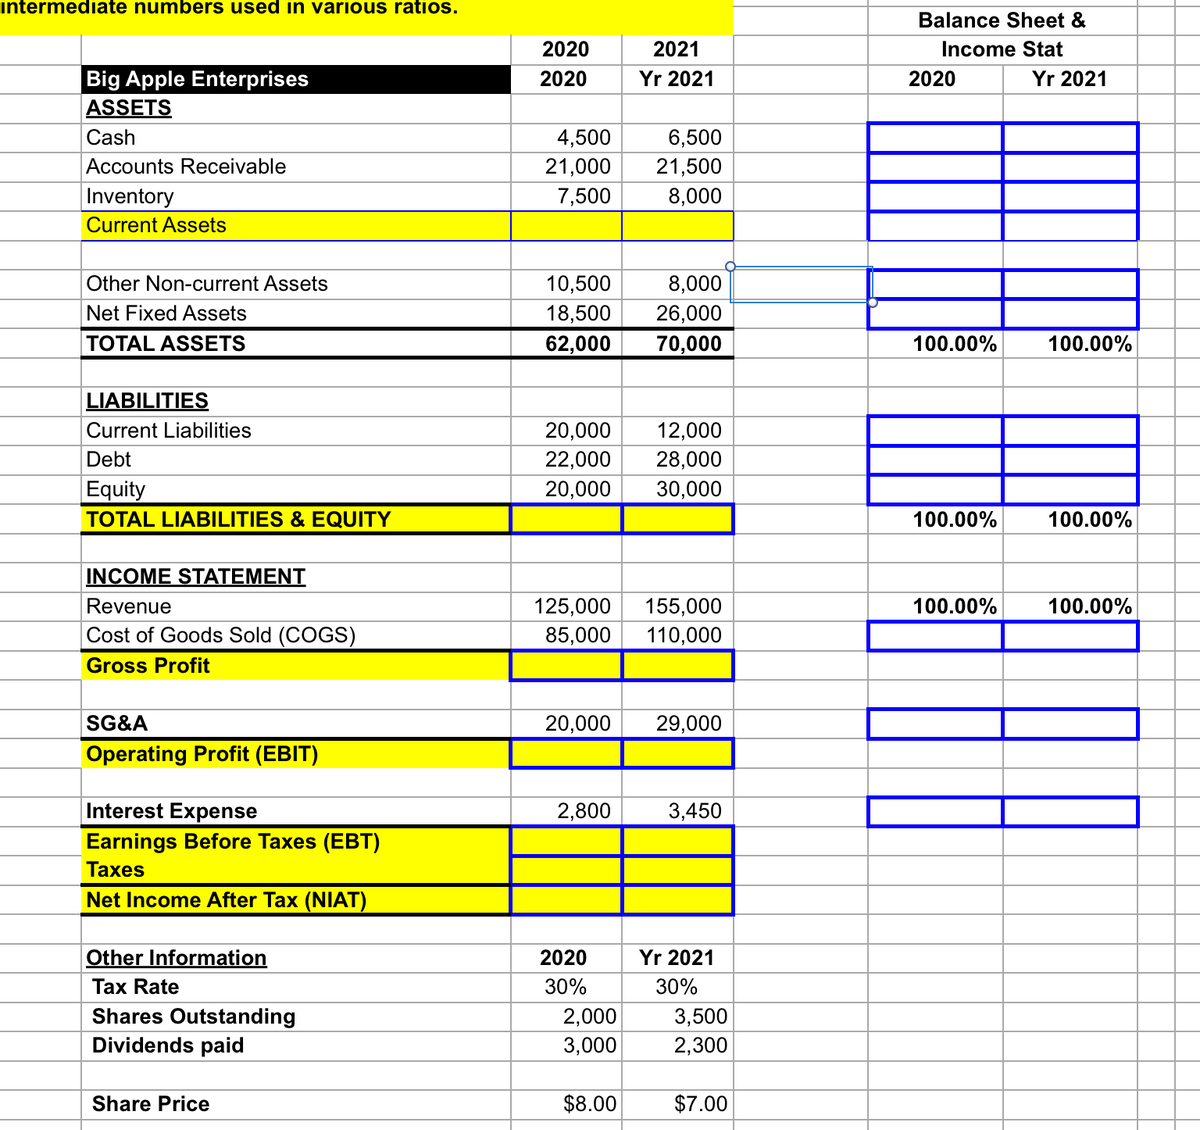 intermediate numbers used in various ratios.
Big Apple Enterprises
ASSETS
Cash
Accounts Receivable
Inventory
Current Assets
Other Non-current Assets
Net Fixed Assets
TOTAL ASSETS
LIABILITIES
Current Liabilities
Debt
Equity
TOTAL LIABILITIES & EQUITY
INCOME STATEMENT
Revenue
Cost of Goods Sold (COGS)
Gross Profit
SG&A
Operating Profit (EBIT)
Interest Expense
Earnings Before Taxes (EBT)
Taxes
Net Income After Tax (NIAT)
Other Information
Tax Rate
Shares Outstanding
Dividends paid
Share Price
2020
2020
4,500
21,000
7,500
10,500
18,500
62,000
20,000
22,000
12,000
28,000
20,000 30,000
2,800
2021
Yr 2021
125,000 155,000
85,000
110,000
2020
30%
6,500
21,500
8,000
20,000 29,000
2,000
3,000
8,000
26,000
70,000
$8.00
3,450
Yr 2021
30%
3,500
2,300
$7.00
Balance Sheet &
Income Stat
Yr 2021
2020
100.00%
100.00%
100.00%
100.00%
100.00%
100.00%